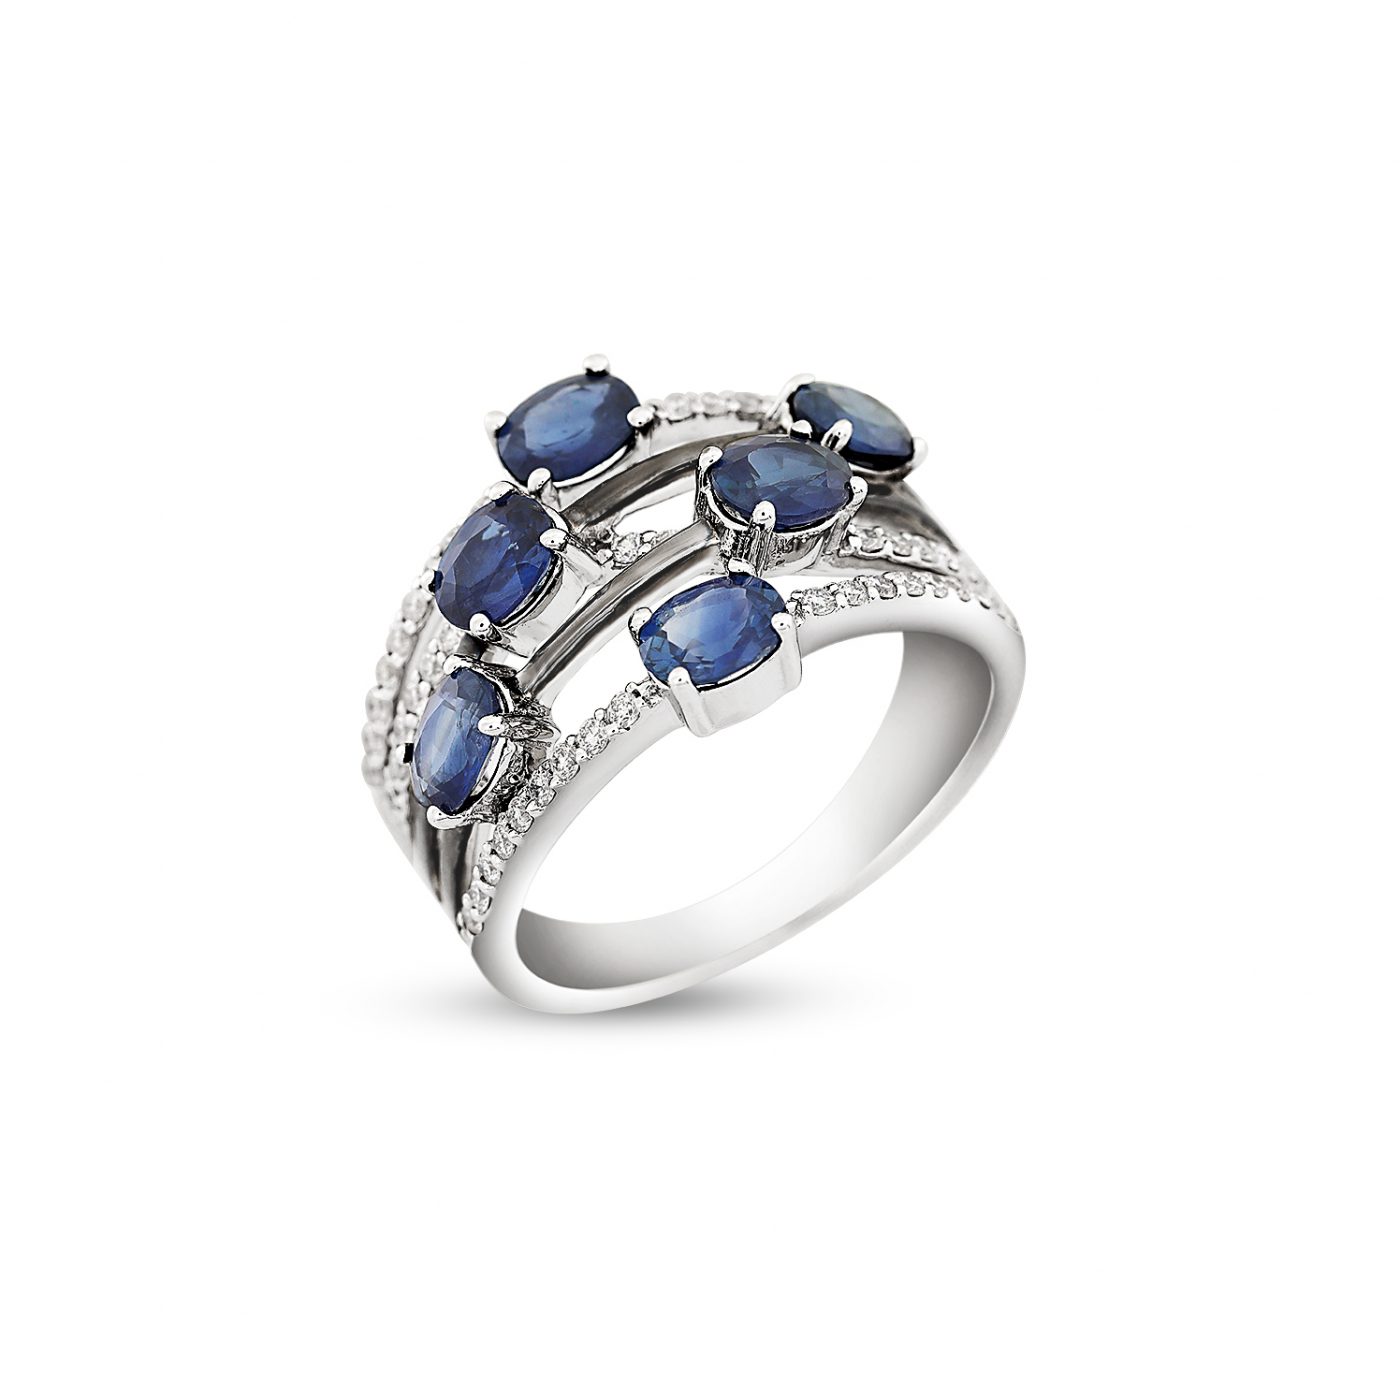 Blue Sapphire Rings Attractive Jewelry For Women